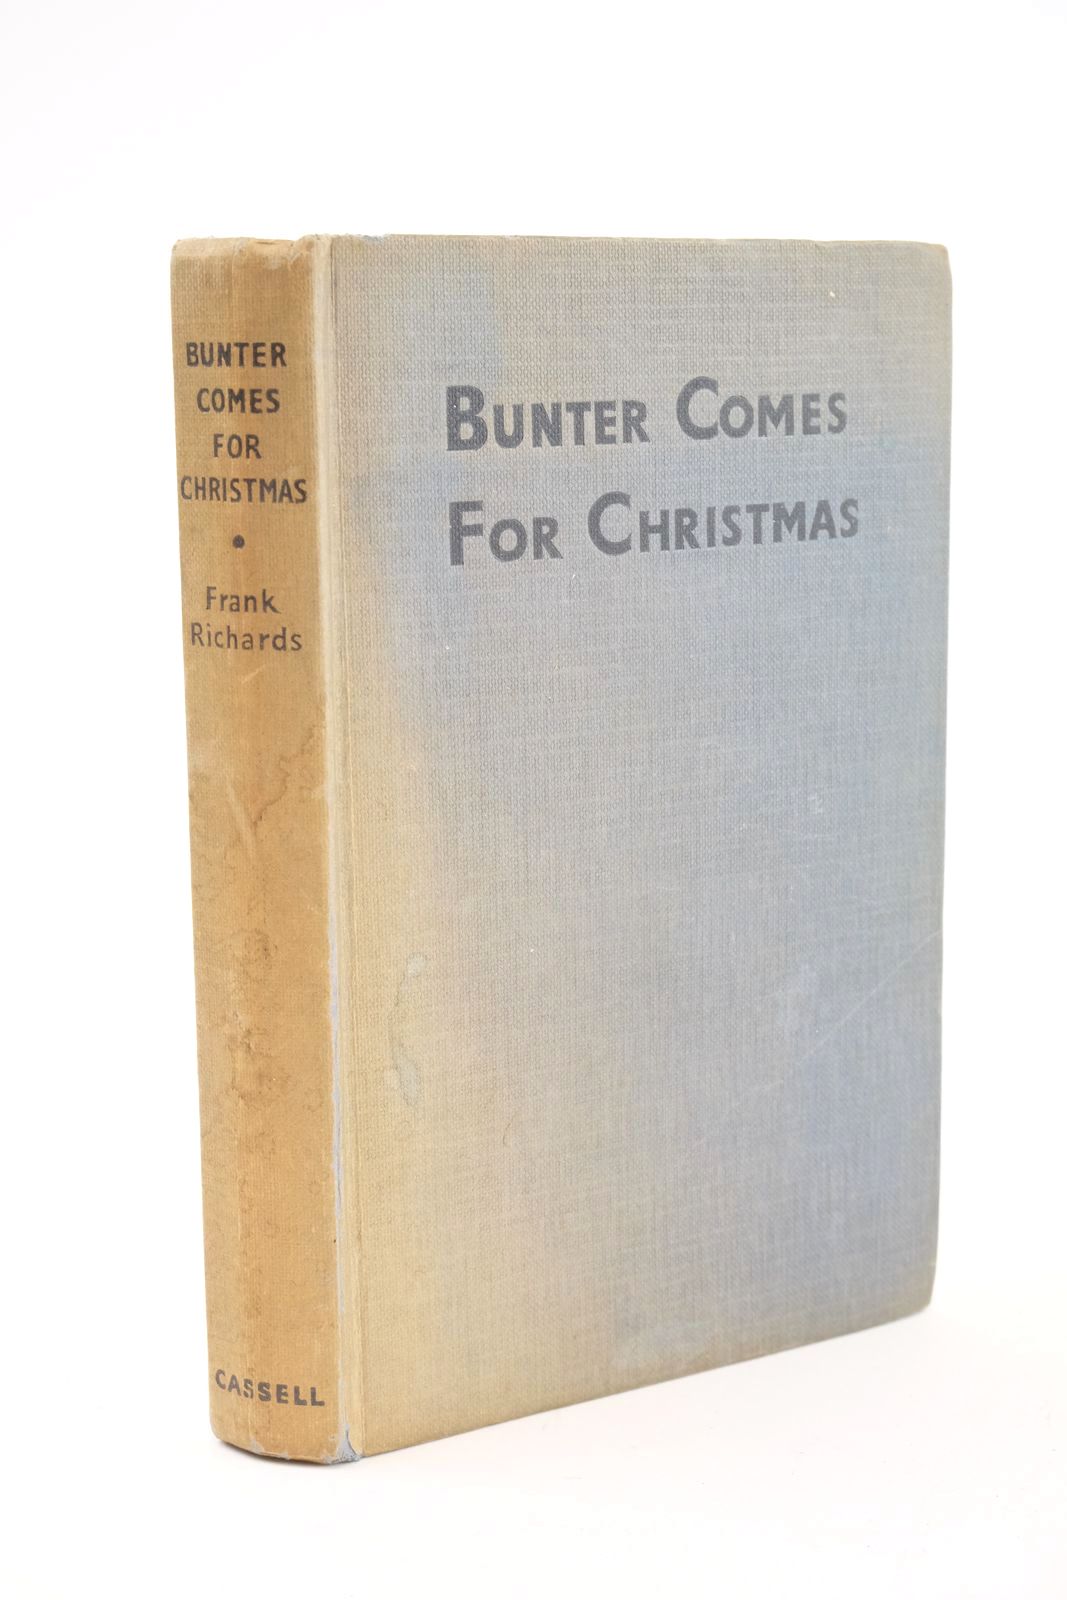 Photo of BUNTER COMES FOR CHRISTMAS written by Richards, Frank illustrated by Chapman, C.H. published by Cassell (STOCK CODE: 1323961)  for sale by Stella & Rose's Books